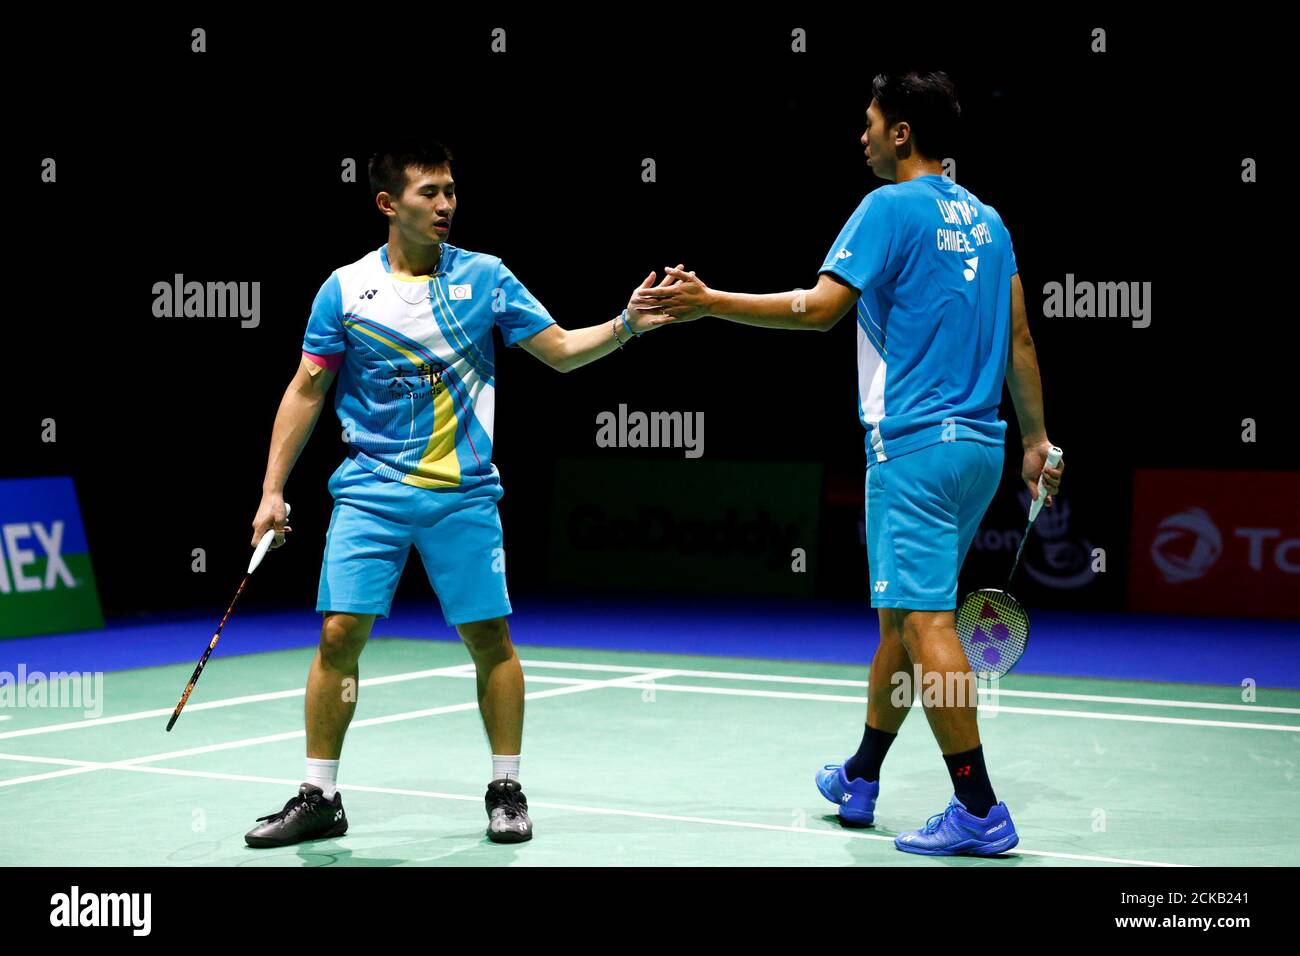 2019 Badminton World Championships - St. Jakobshalle Basel, Basel,  Switzerland - August 22, 2019 Taiwan's Su Ching Heng and Liao Min Chun  react during their third round men's doubles match against Denmark's